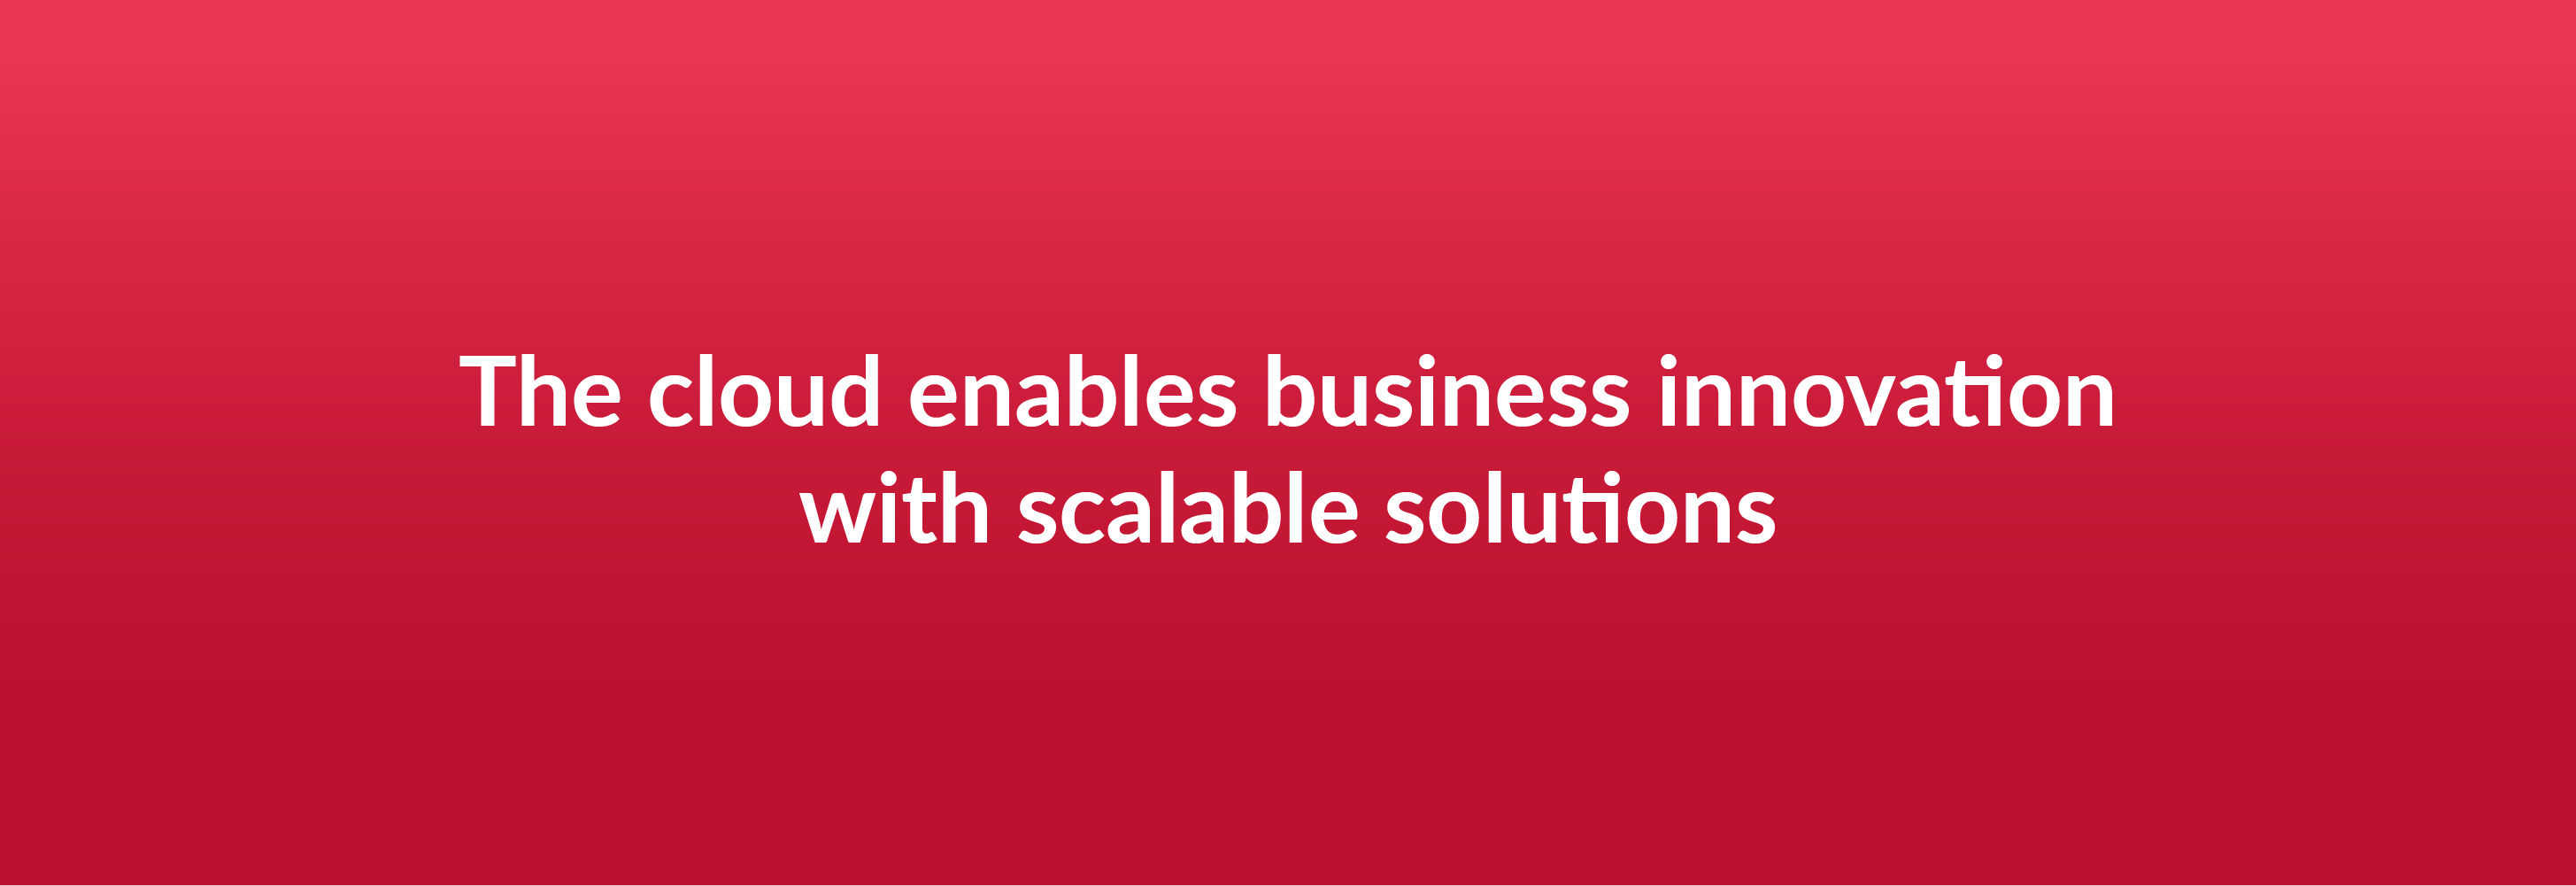 The cloud enables business innovation with scalable solutions